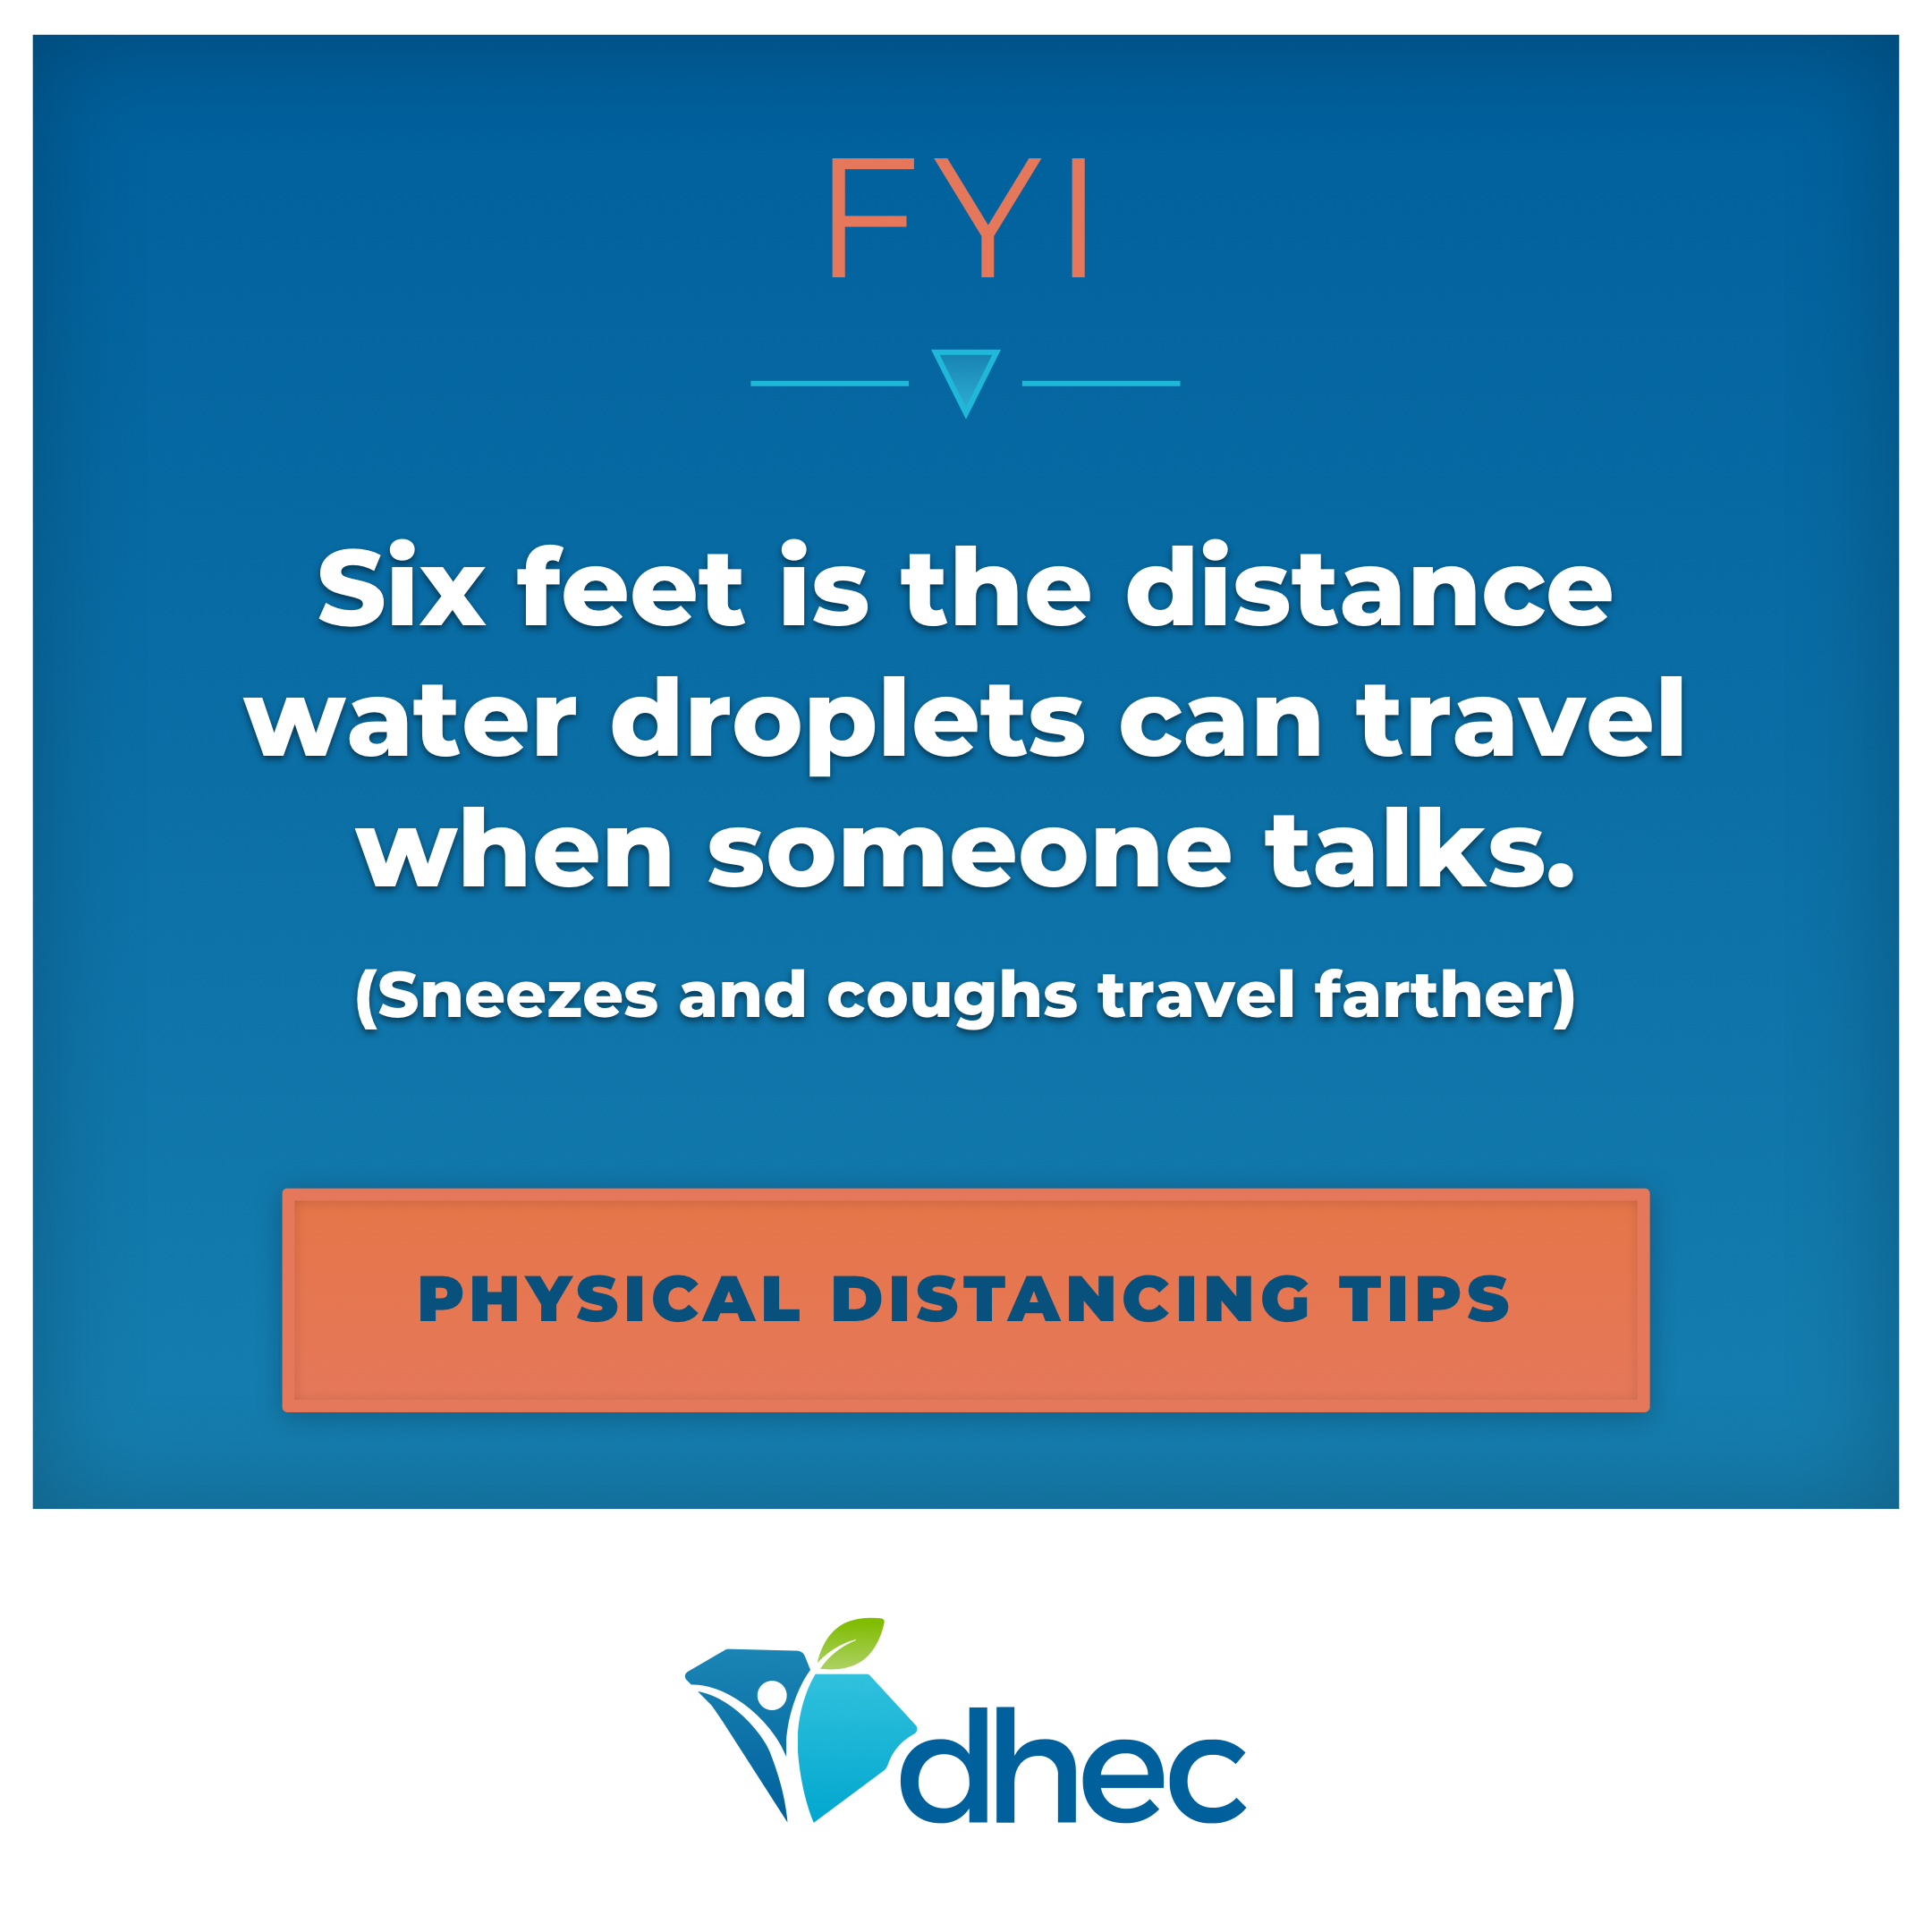 COVID FYI: Six feet is the distance water droplets can travel when someone talks.